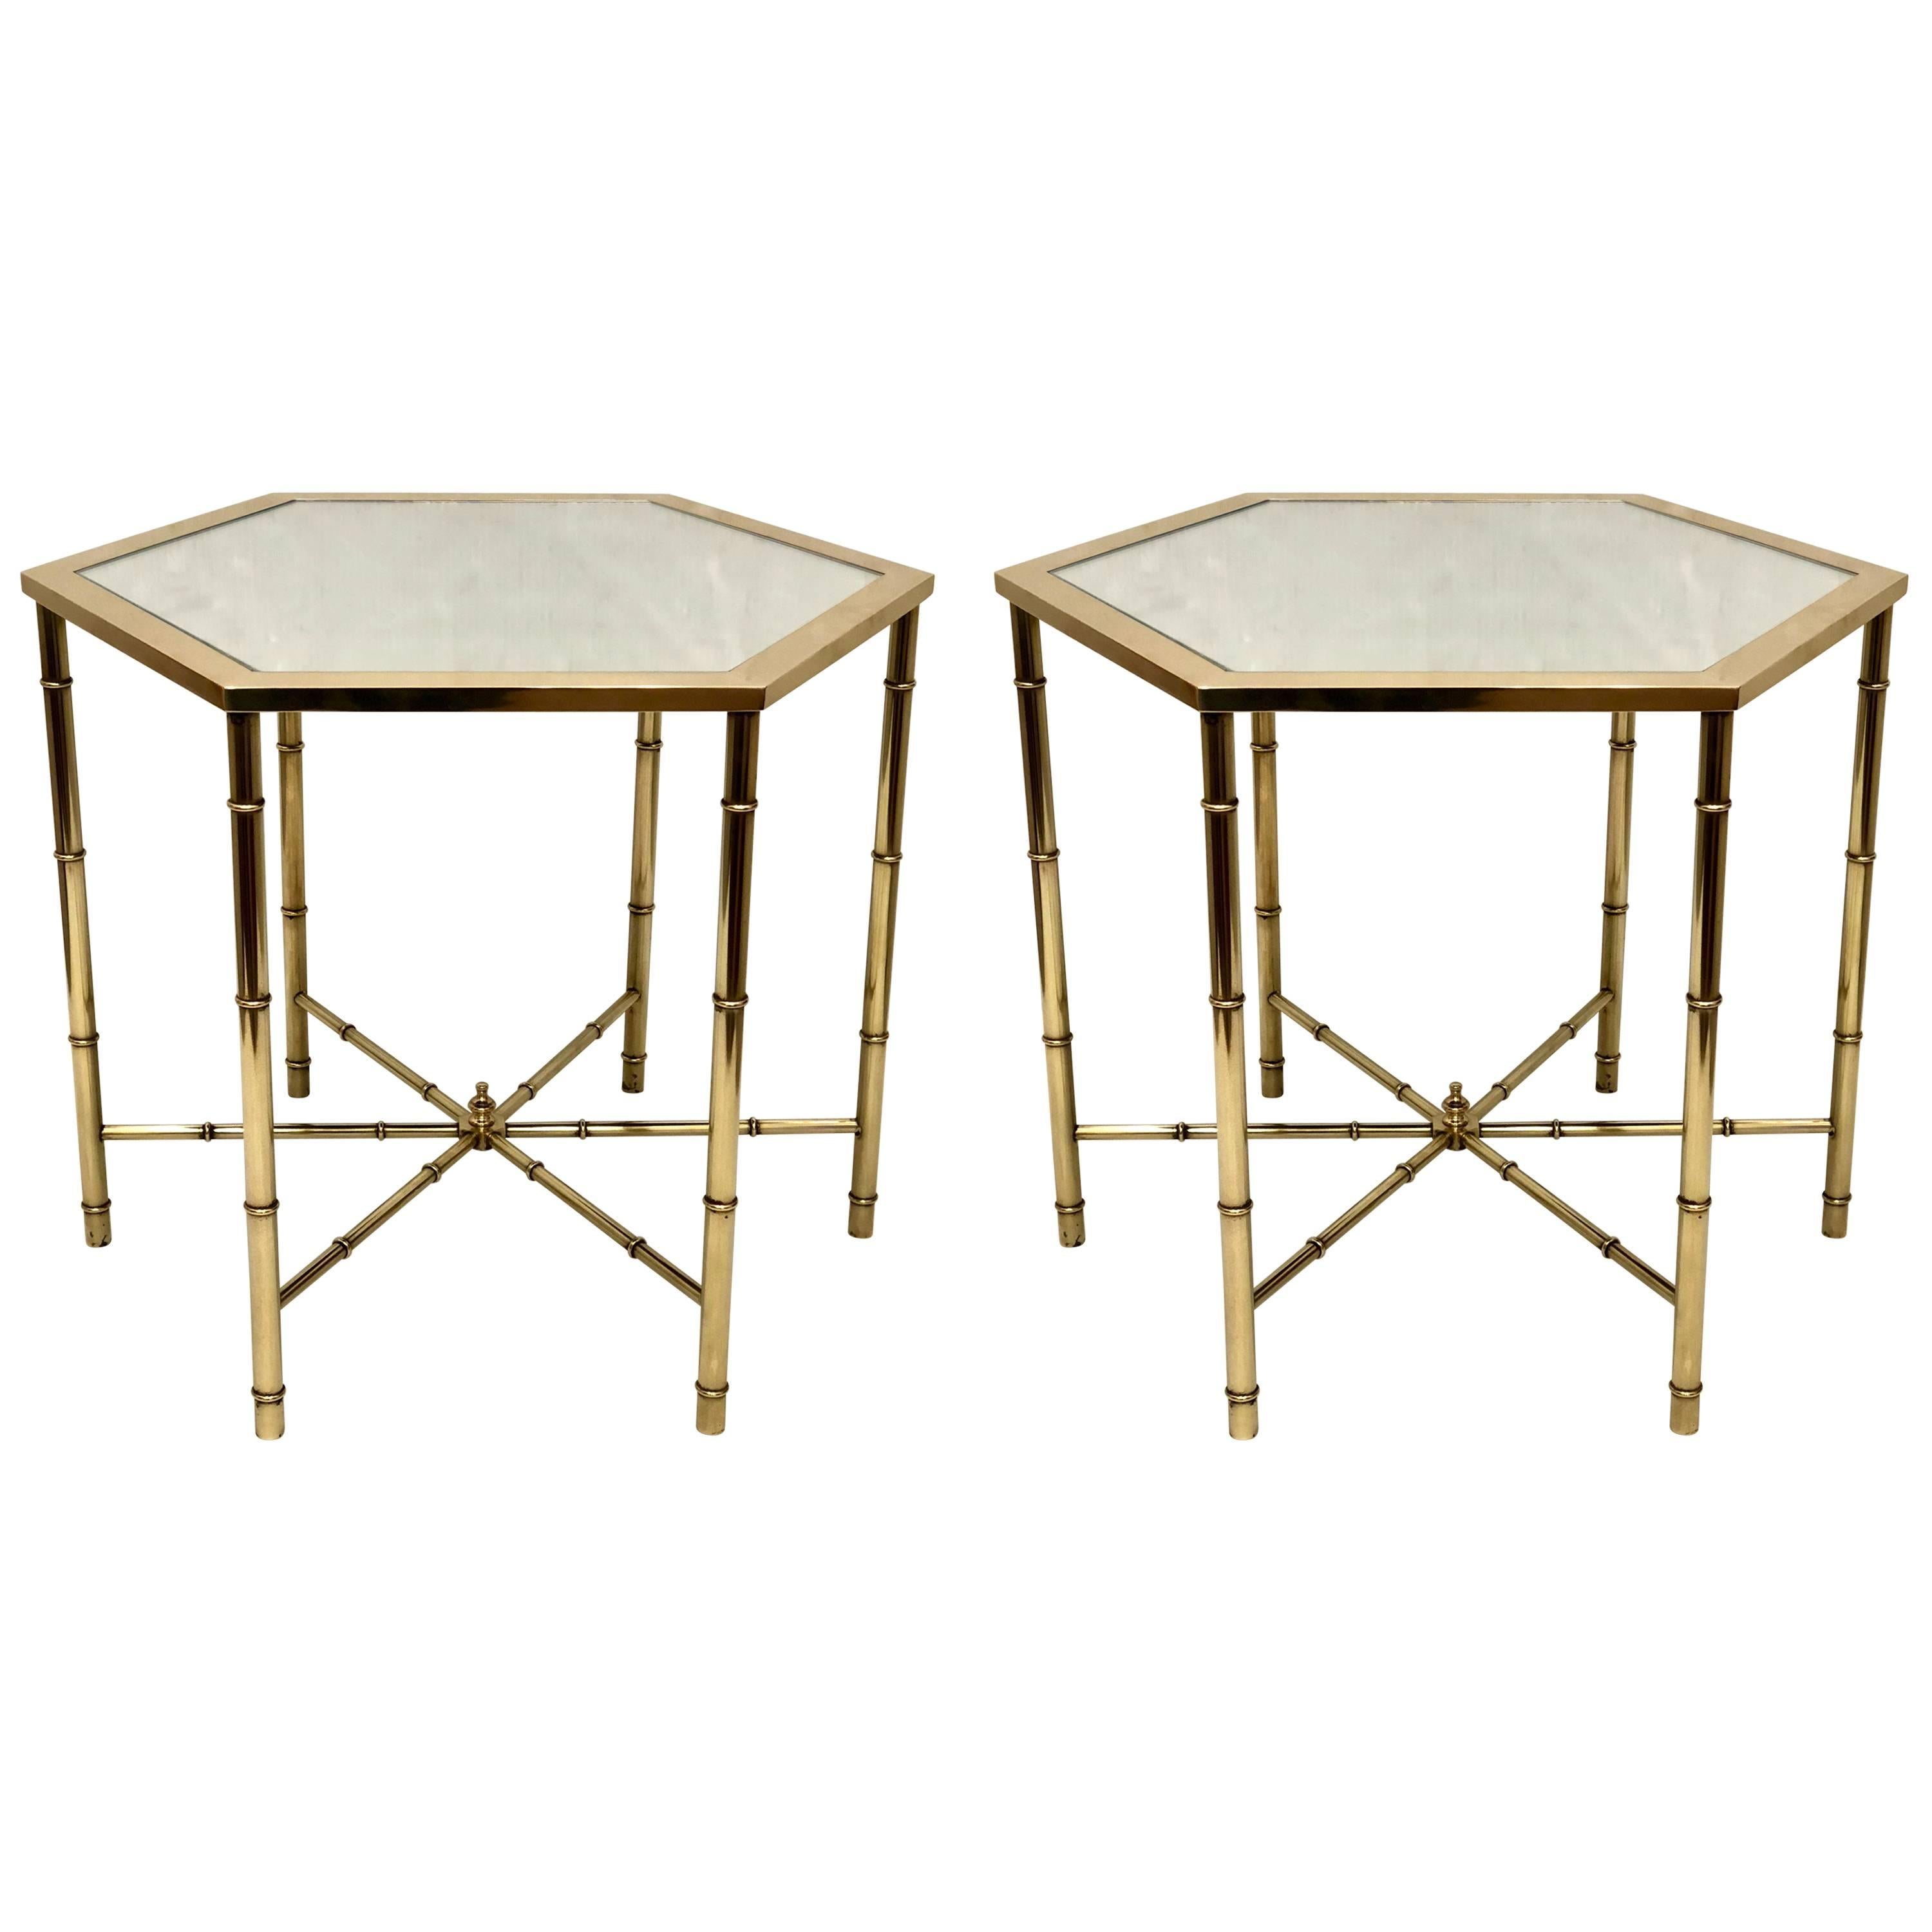 Pair of Polished Brass and Mirror Tops Hexagonal Cocktail Tables by Mastercraft